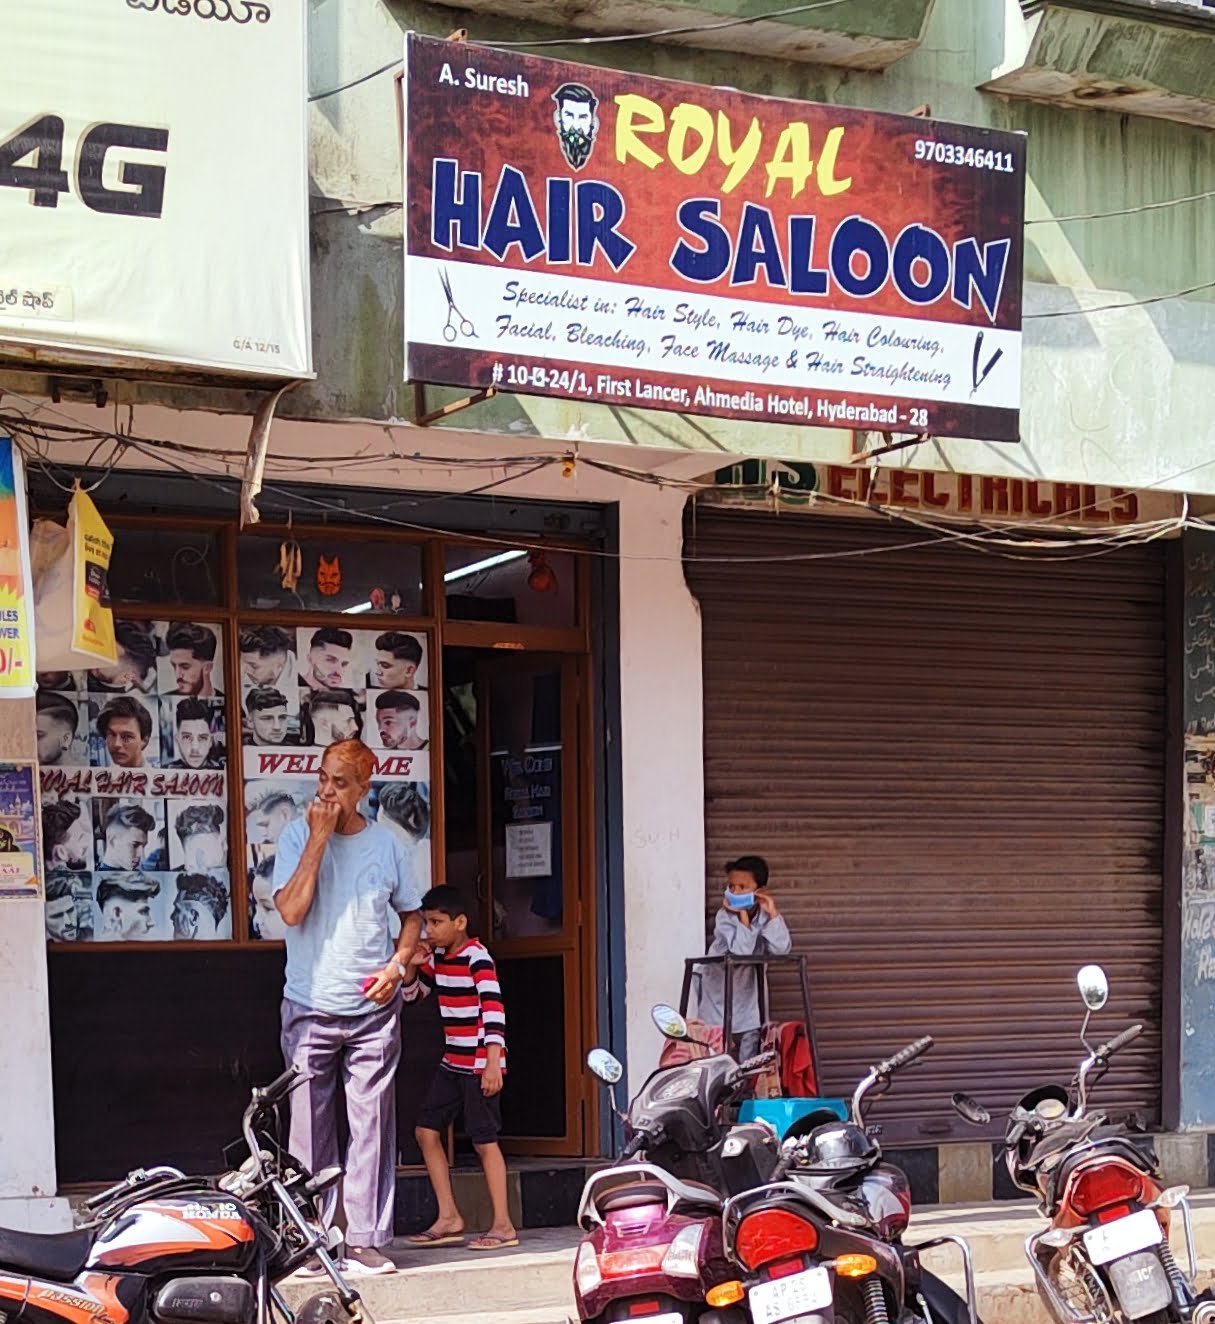 Royal Hair Saloon in First Lancer - Bajrai Online Solutions